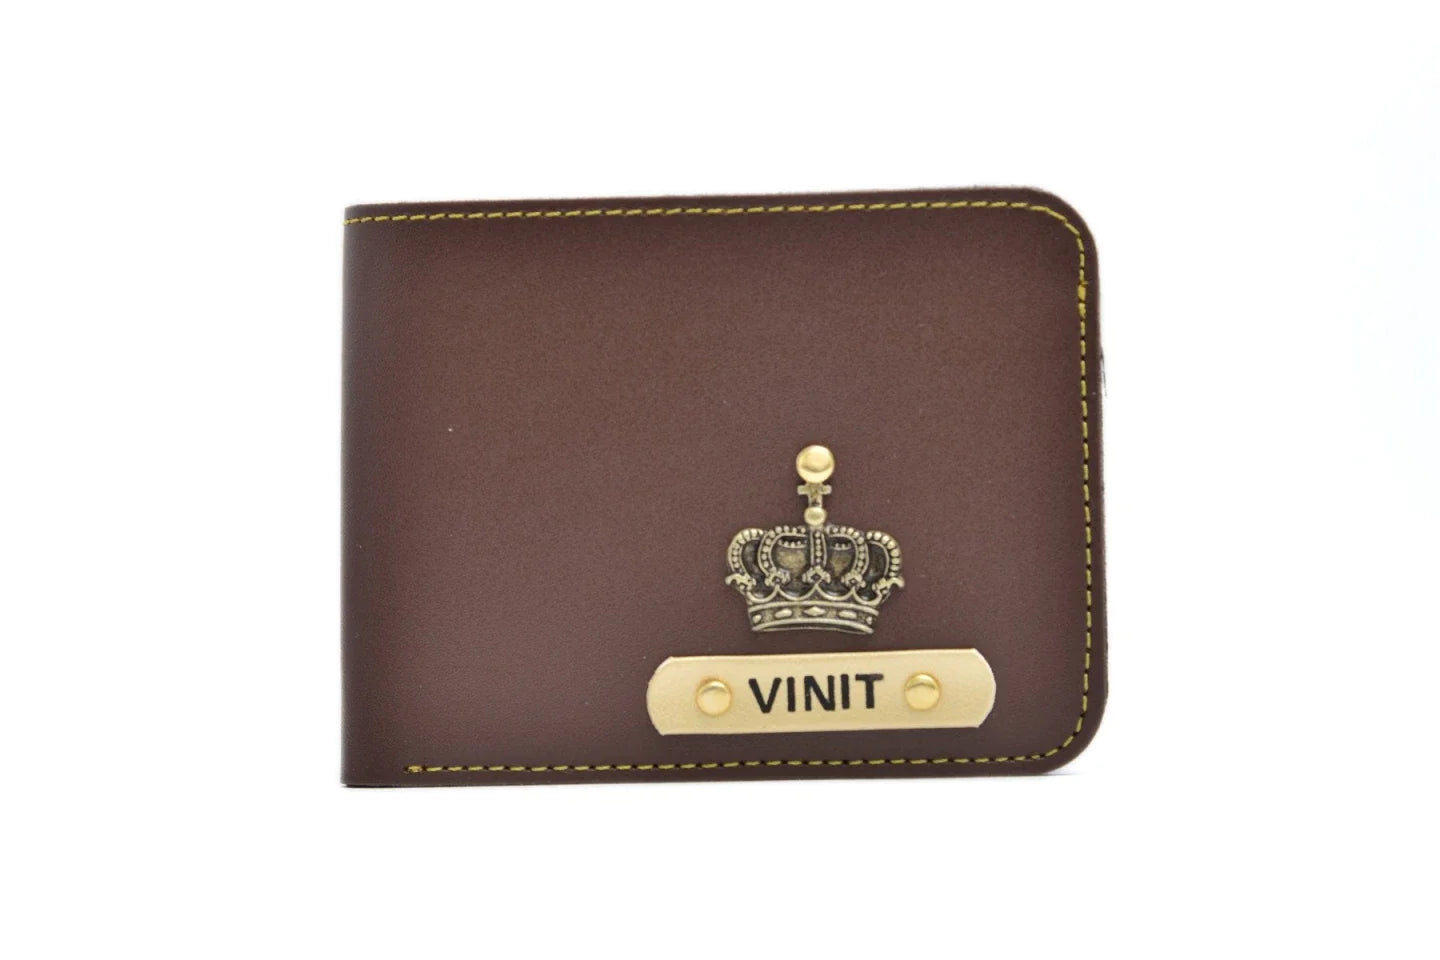 Classy wallet made with the top-notch quality vegan leather is the perfect touch to any office/formal attire. This is the best corporate gift! 